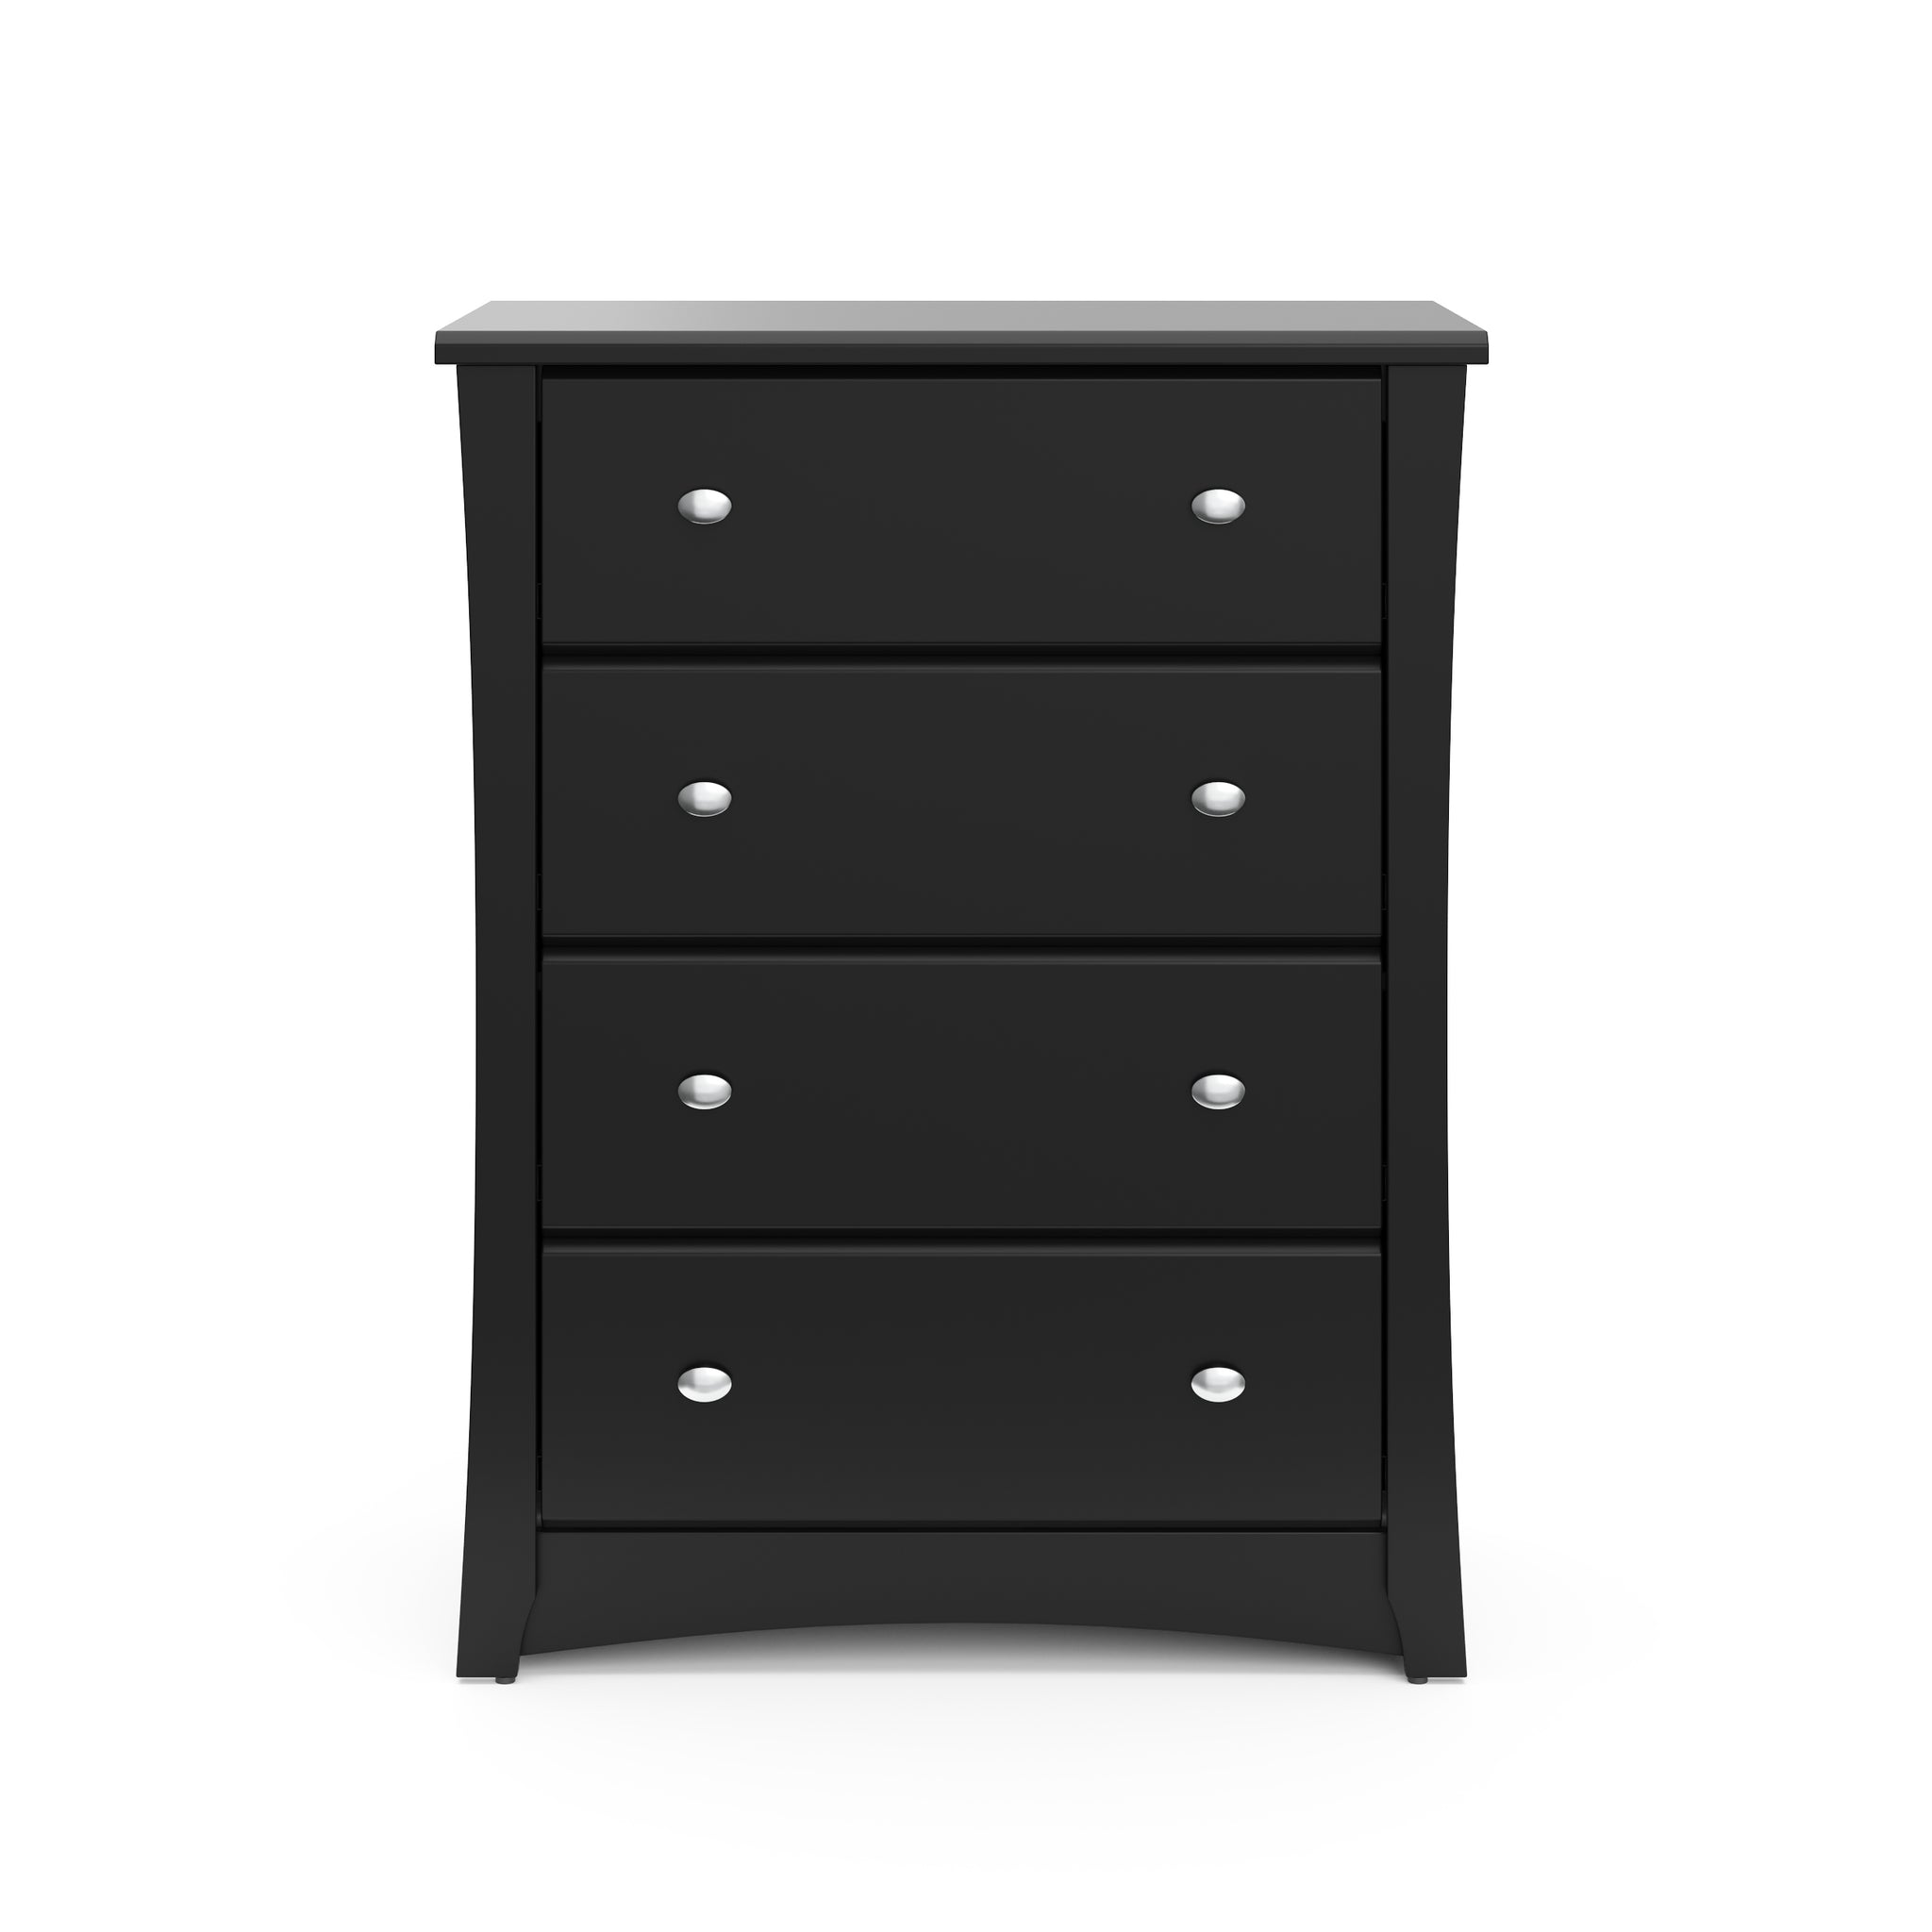 Front view of black 4 drawer chest